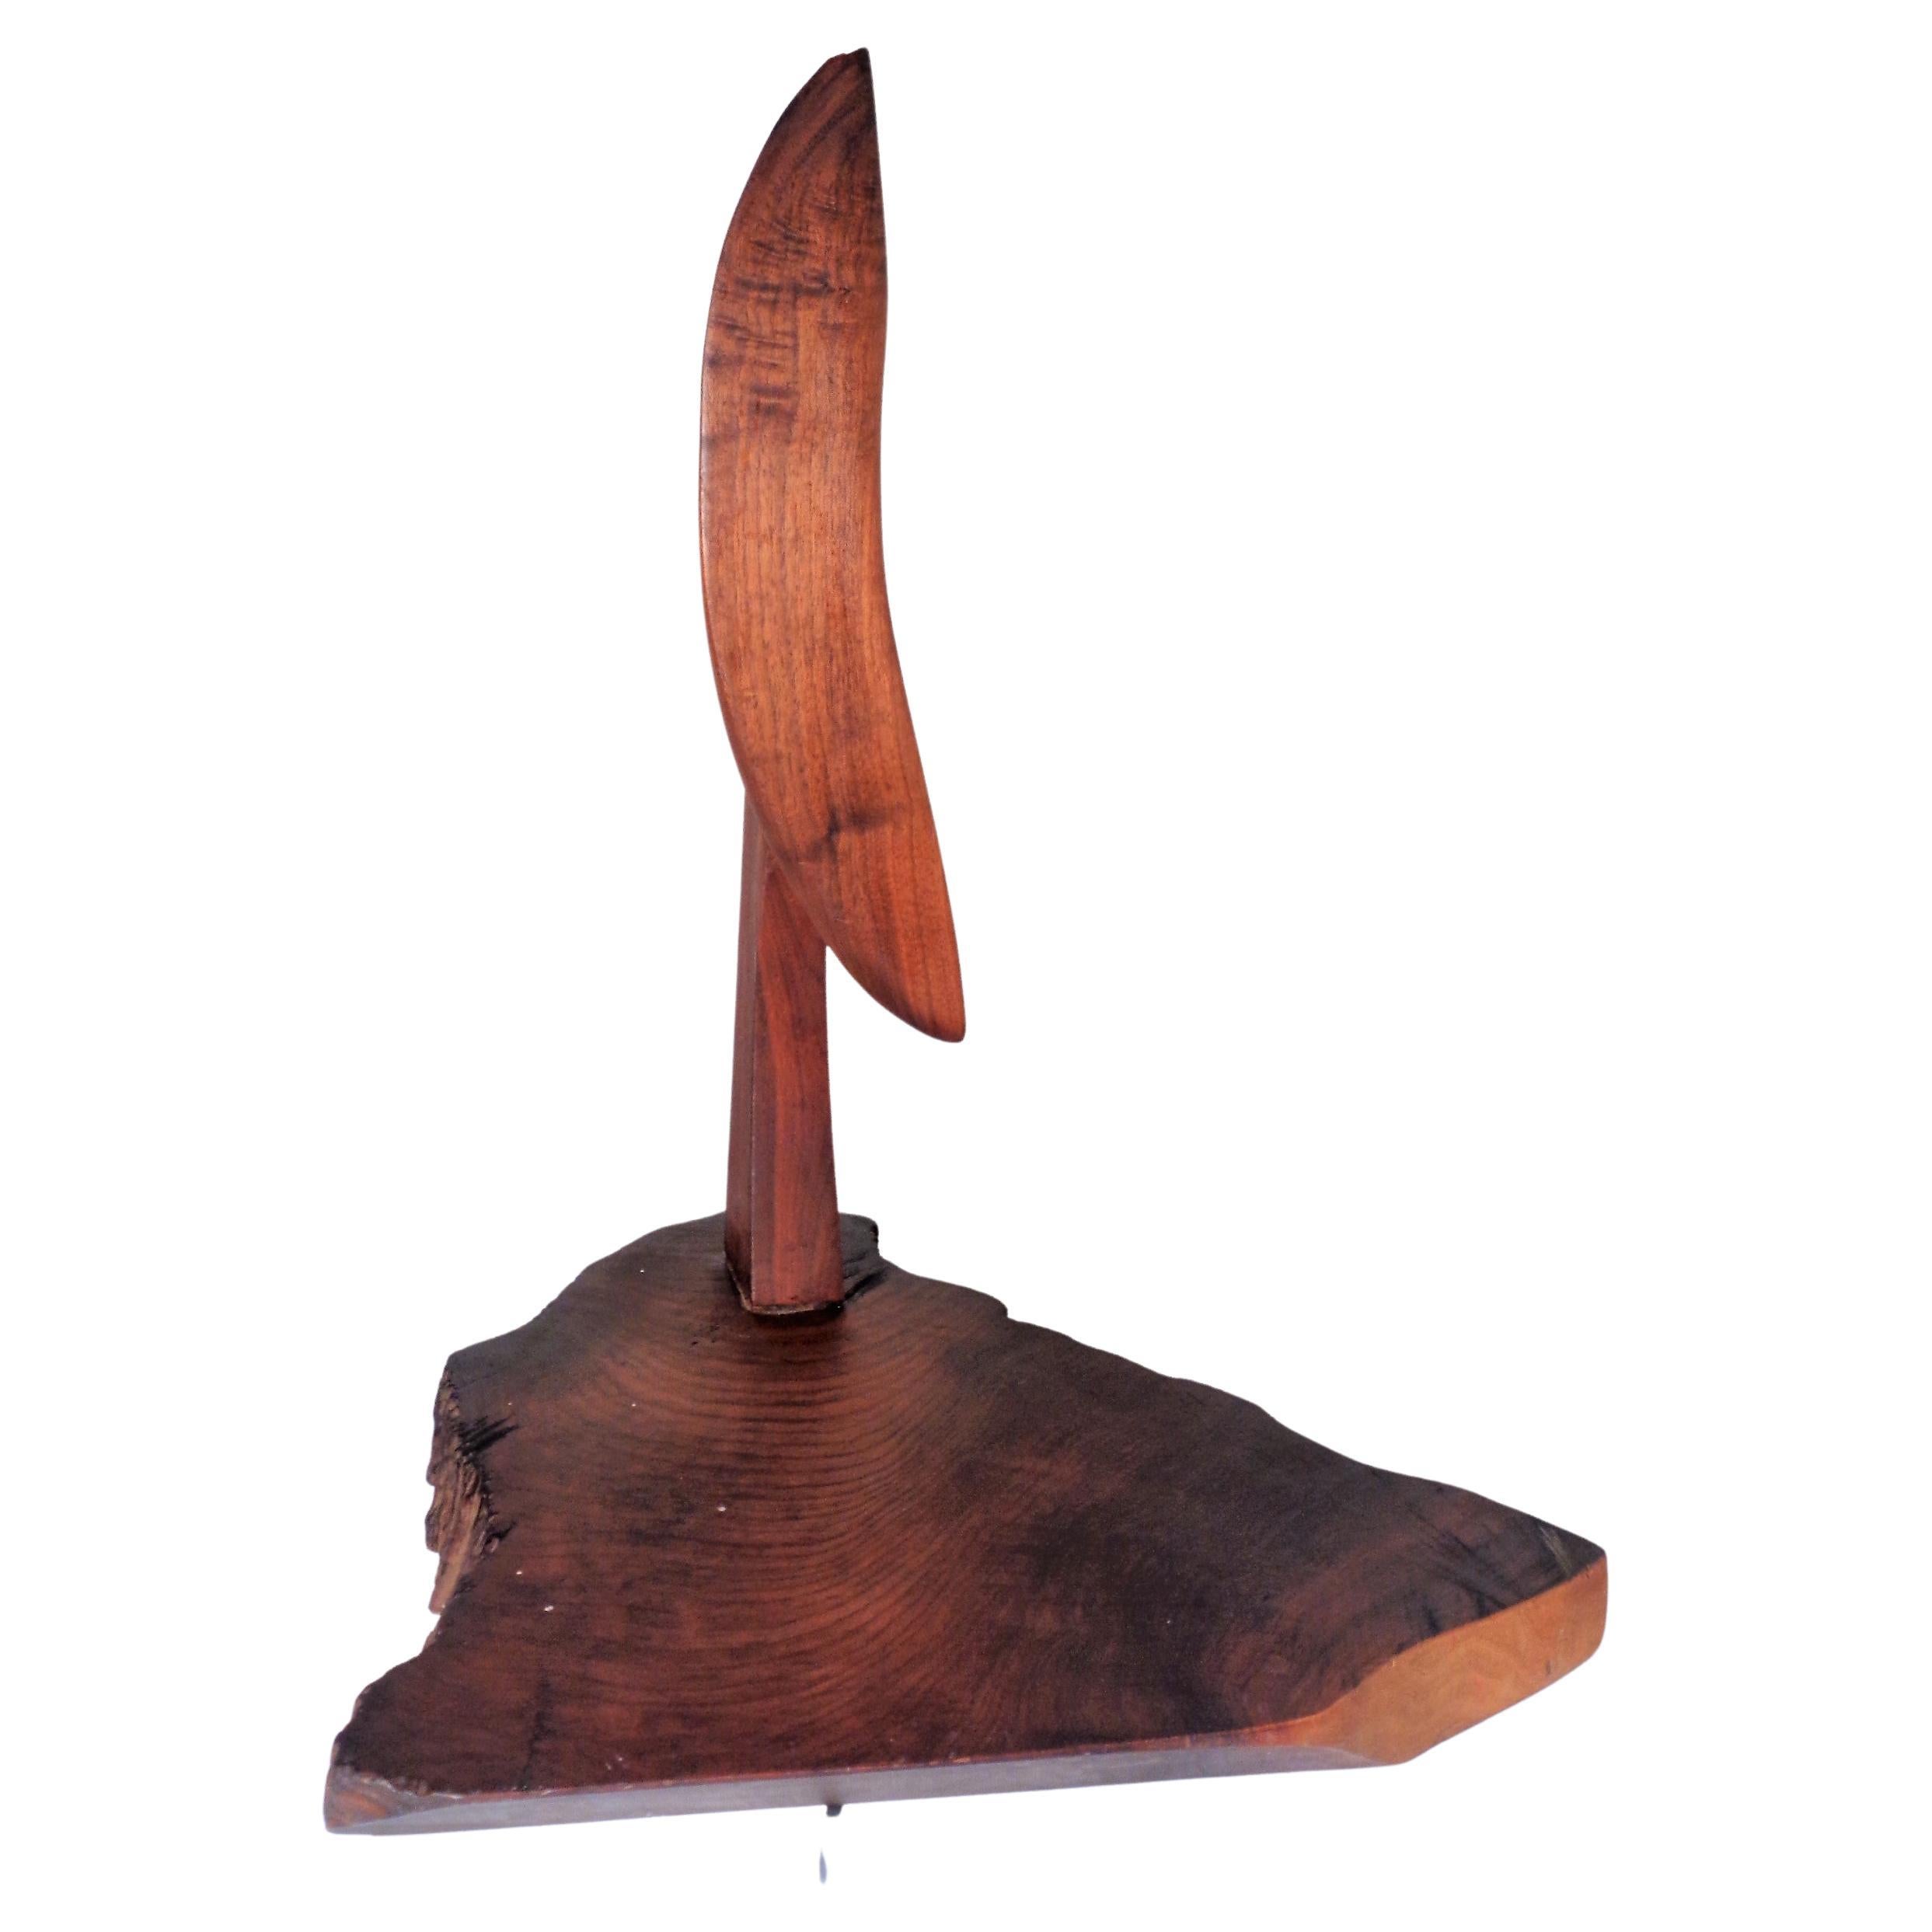 American Studio Craft Movement Modernist Abstract Wood Sculpture, 1970-1980 For Sale 5